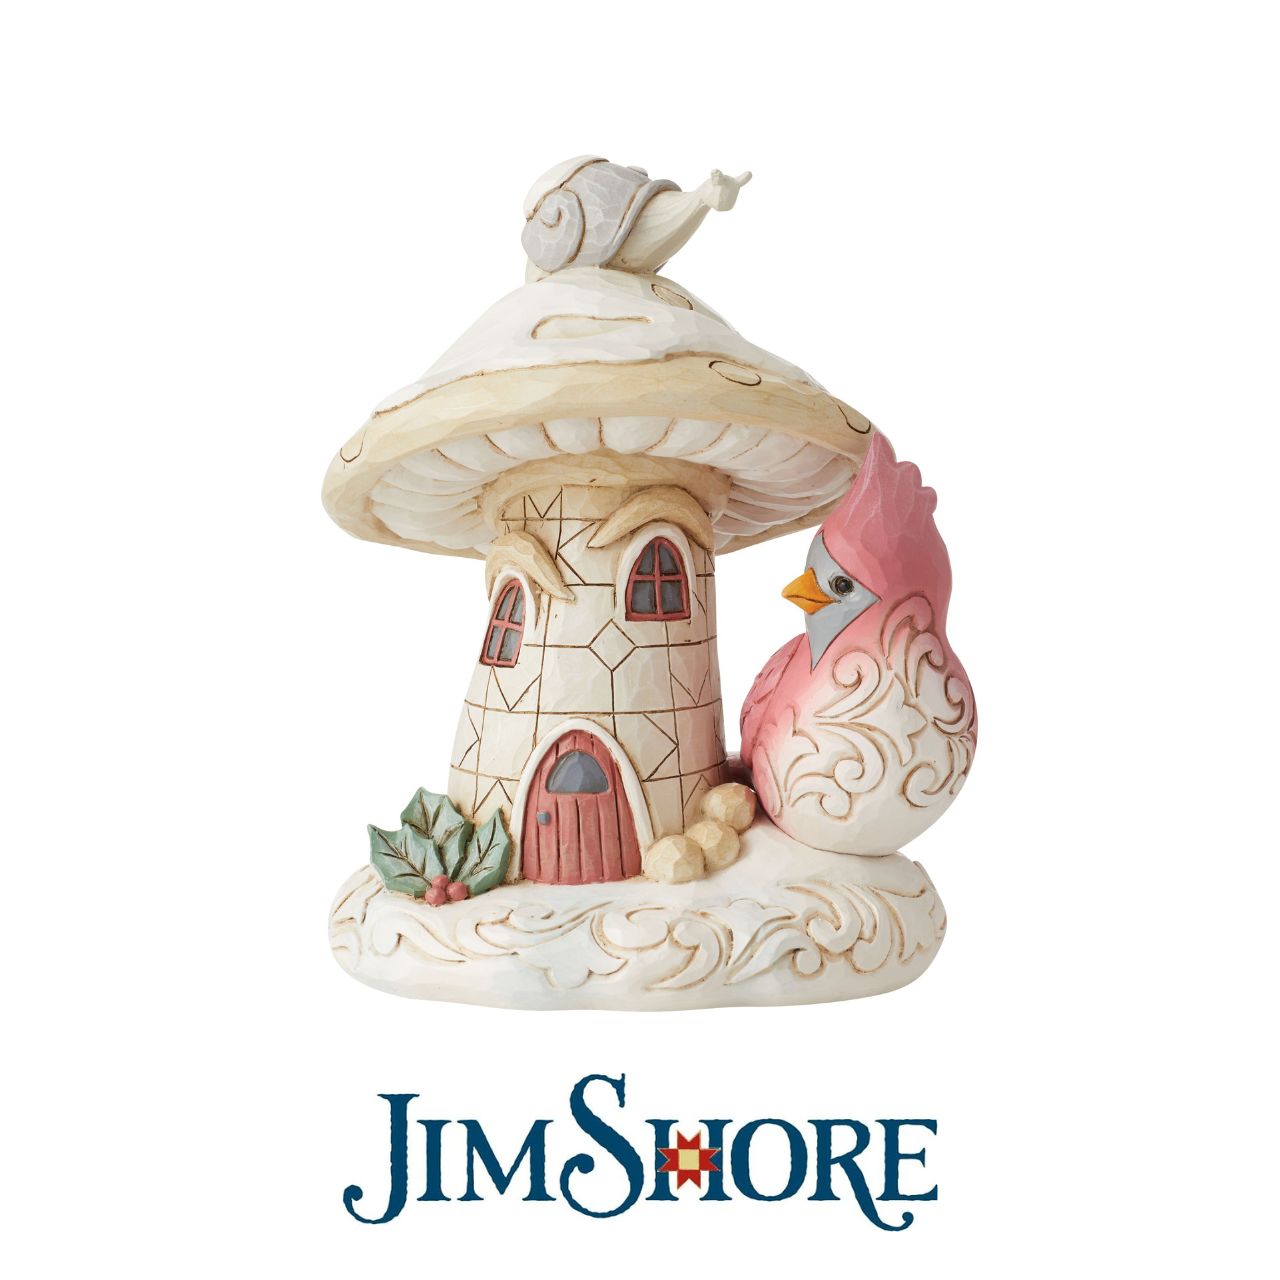 Woodland Mushroom House with Cardinal Figurine by Jim Shore  "Home For the Holidays" Designed in the iconic style of Jim Shore. This mushroom house is inhabited by woodland creatures ready to settle down in comfort for the festive season. Hand painted in high quality cast stone. 